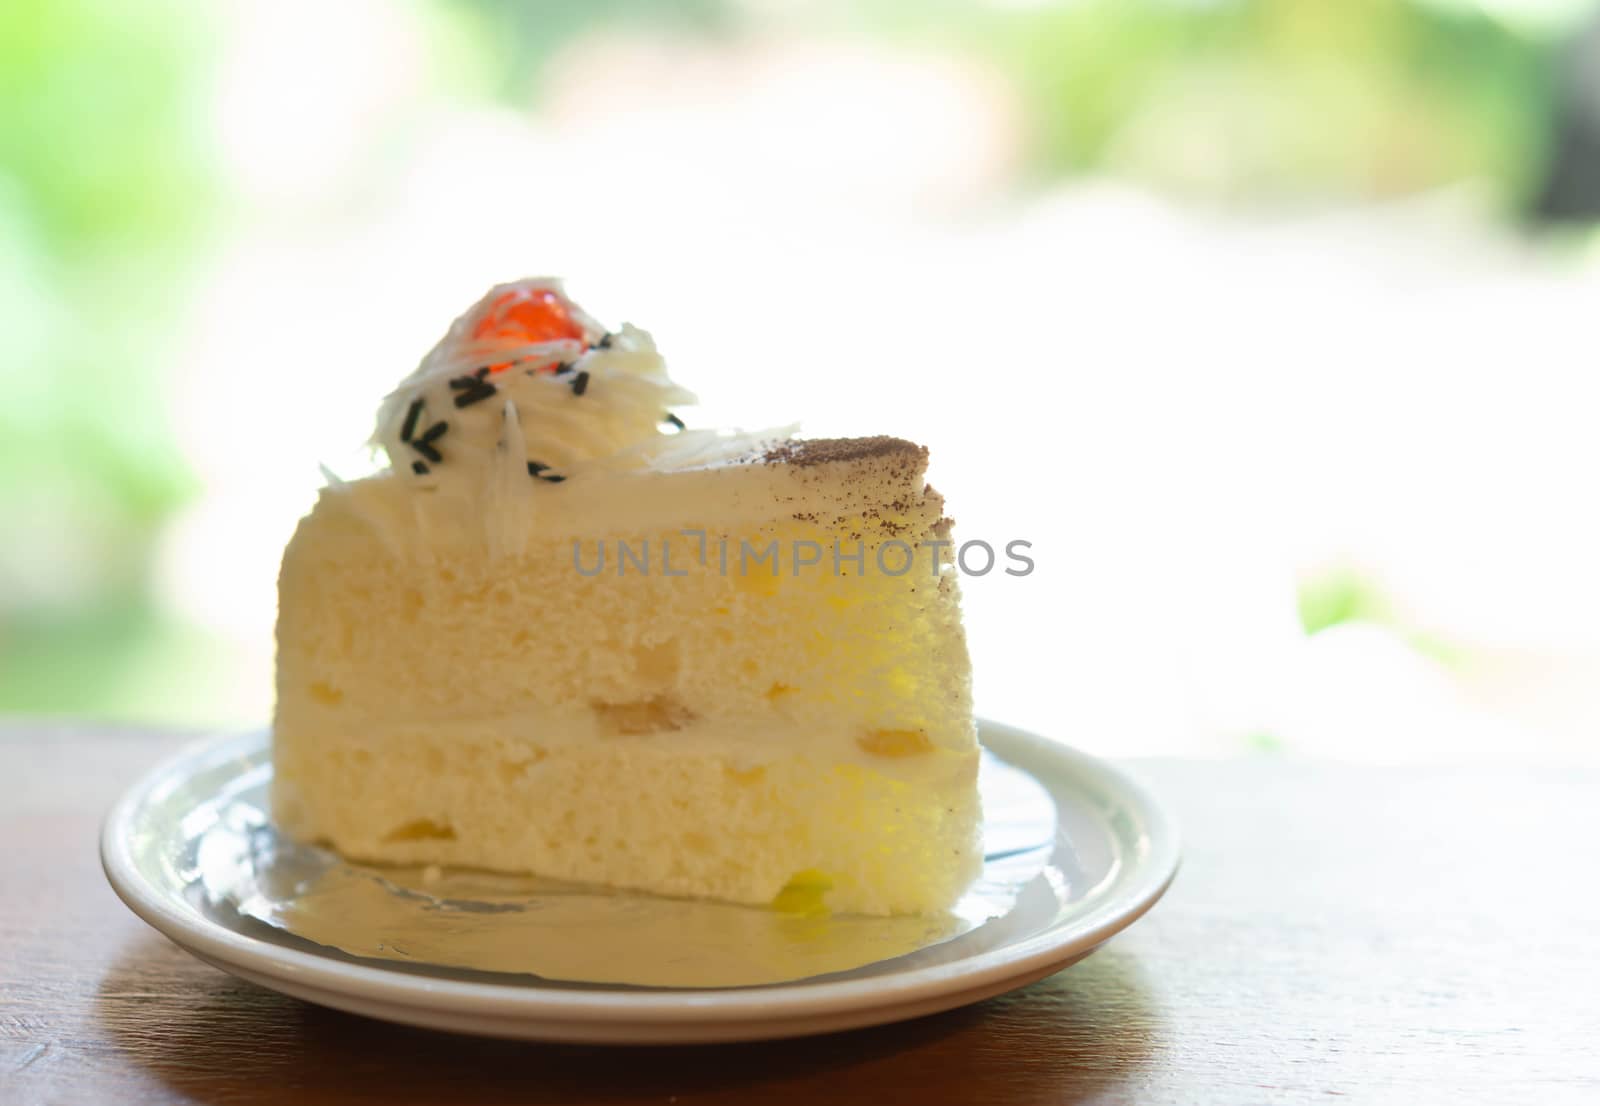 Closeup milk cake on wood table with green nature background, se by pt.pongsak@gmail.com